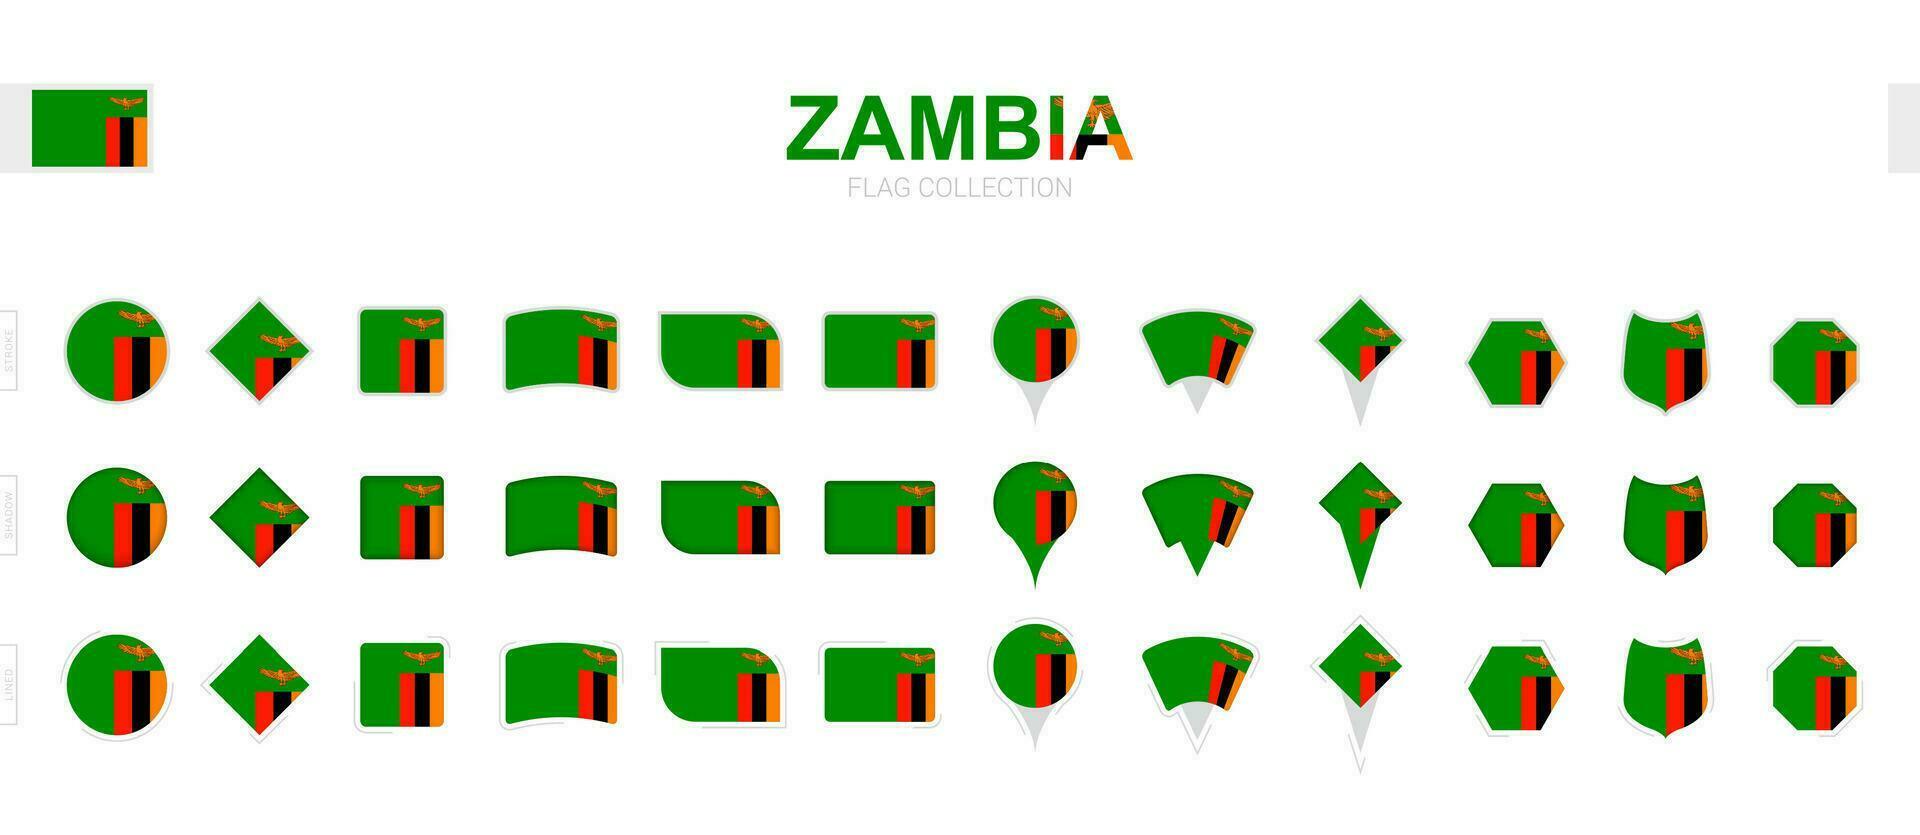 Large collection of Zambia flags of various shapes and effects. vector